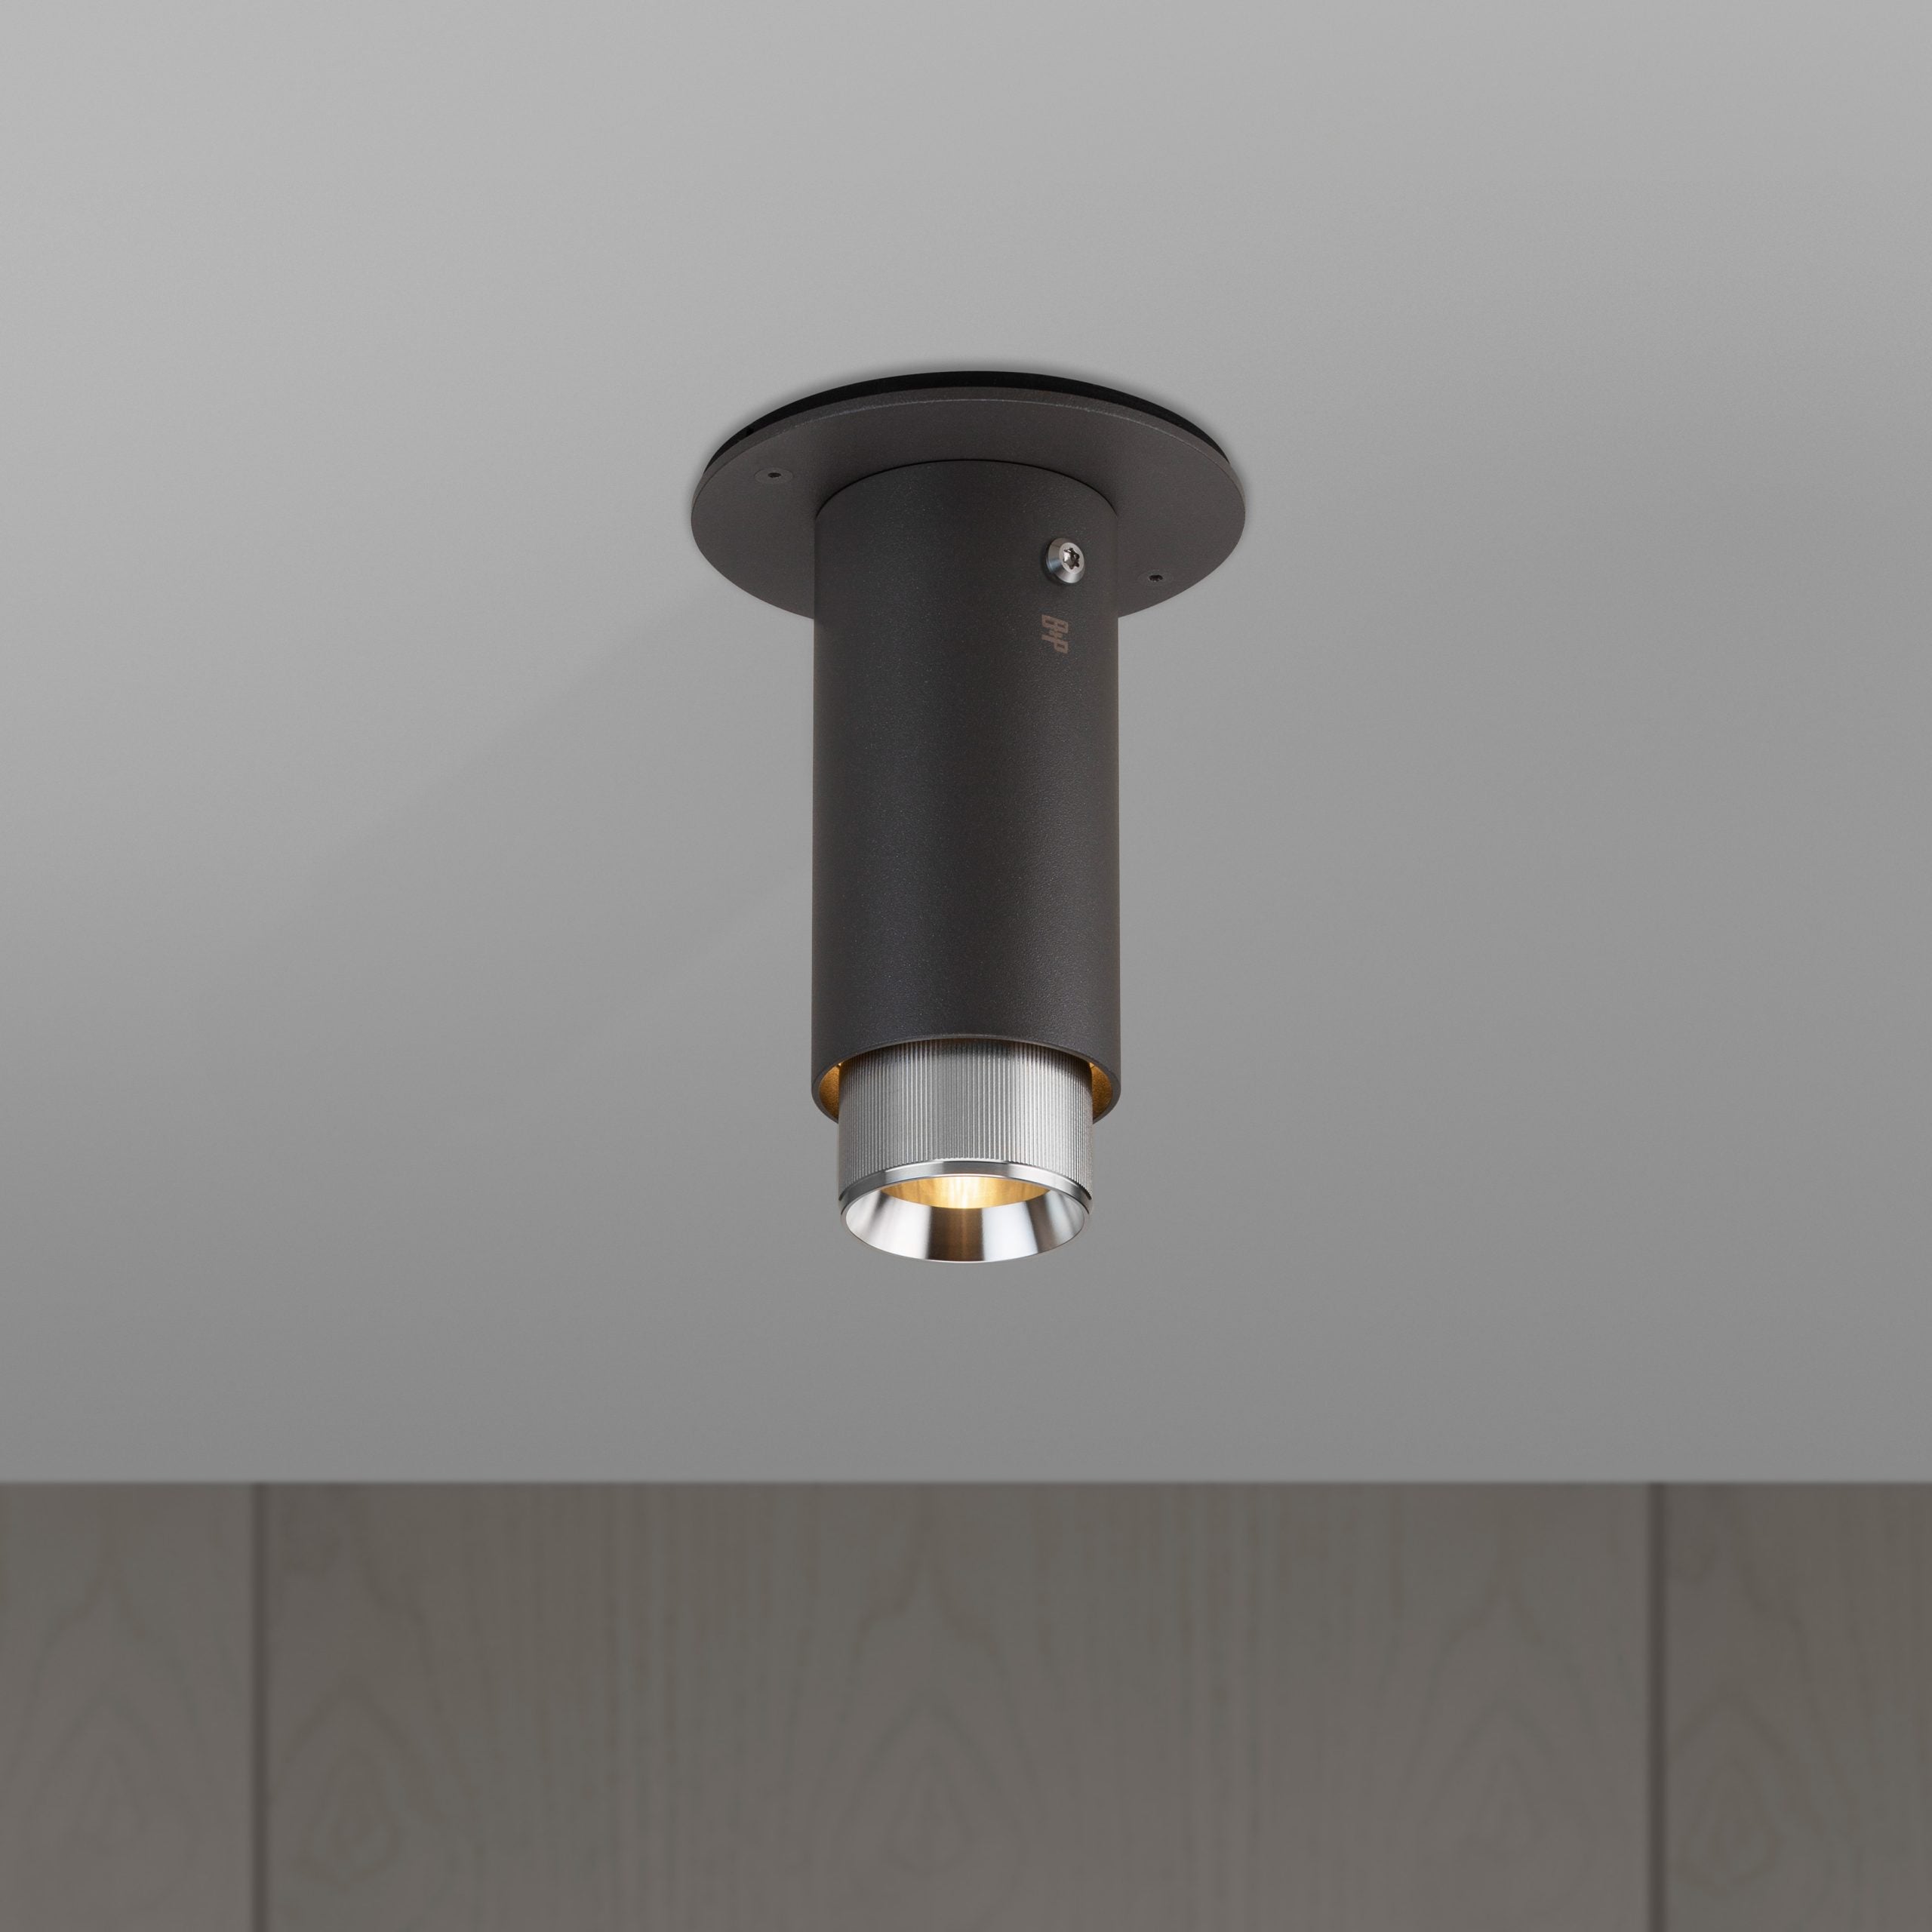 Buster + Punch Exhaust Surface Flush Mount Ceiling Light Buster + Punch Graphite & Steel  